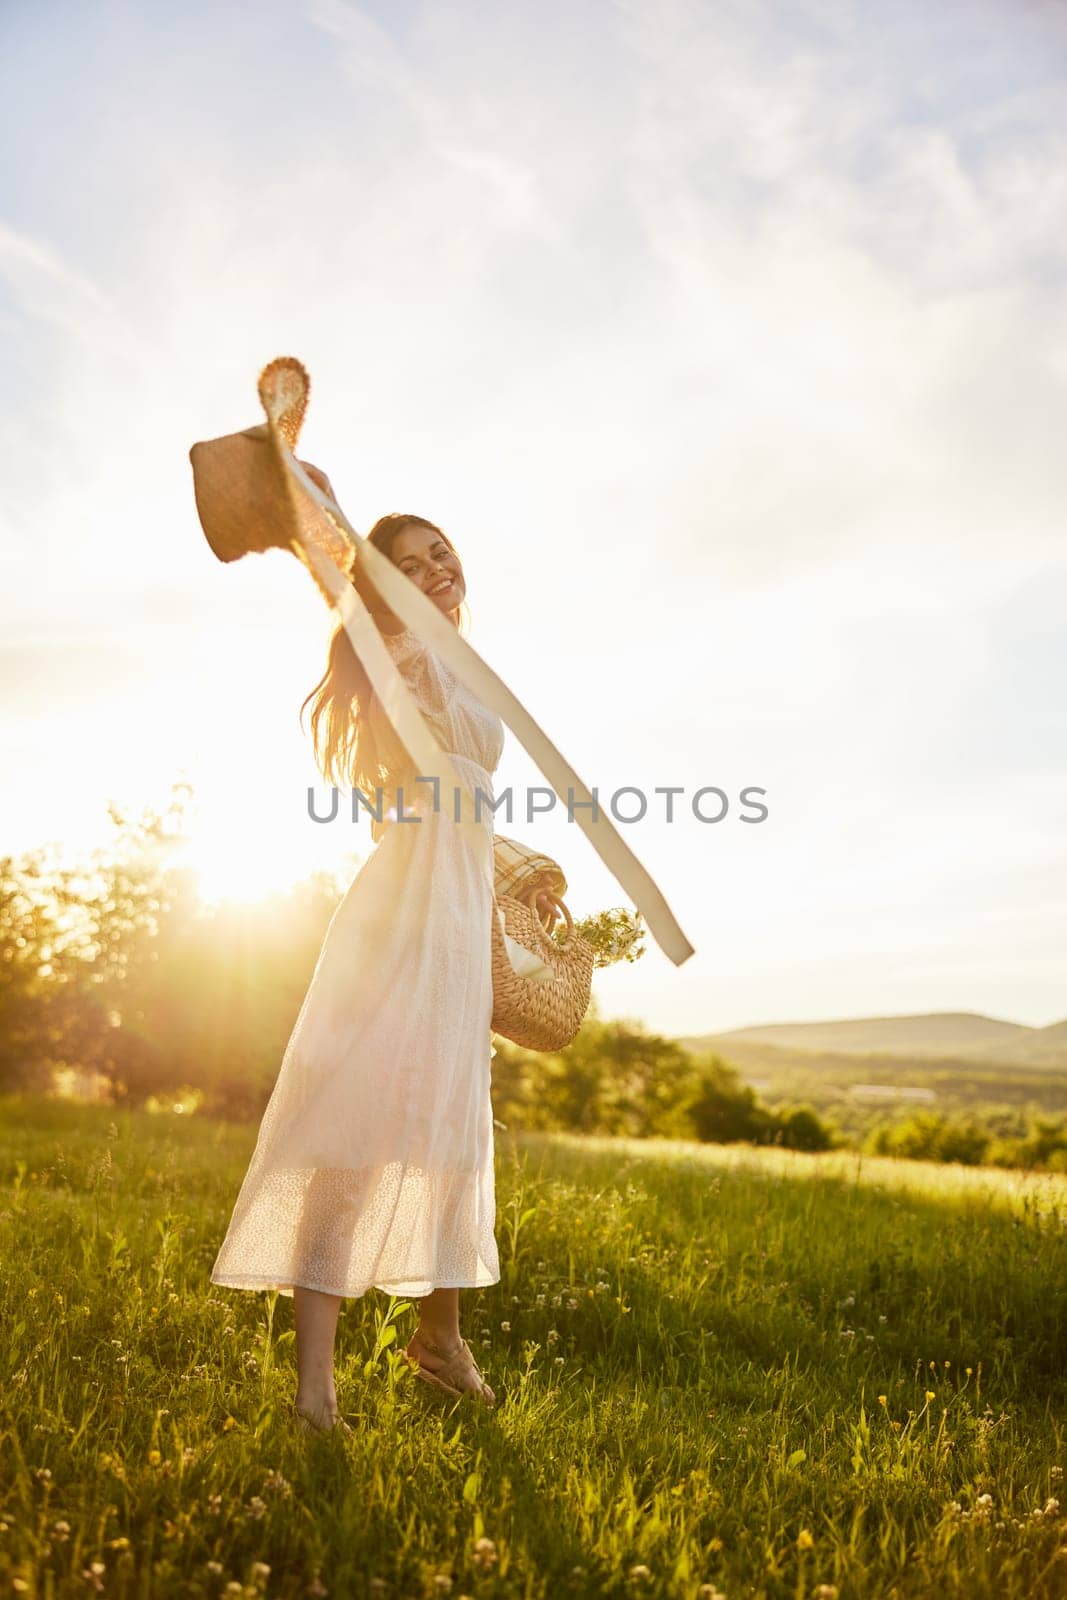 a woman in a light dress is happily spinning in nature, holding a hat in her hands, illuminated from the back by the sun. High quality photo